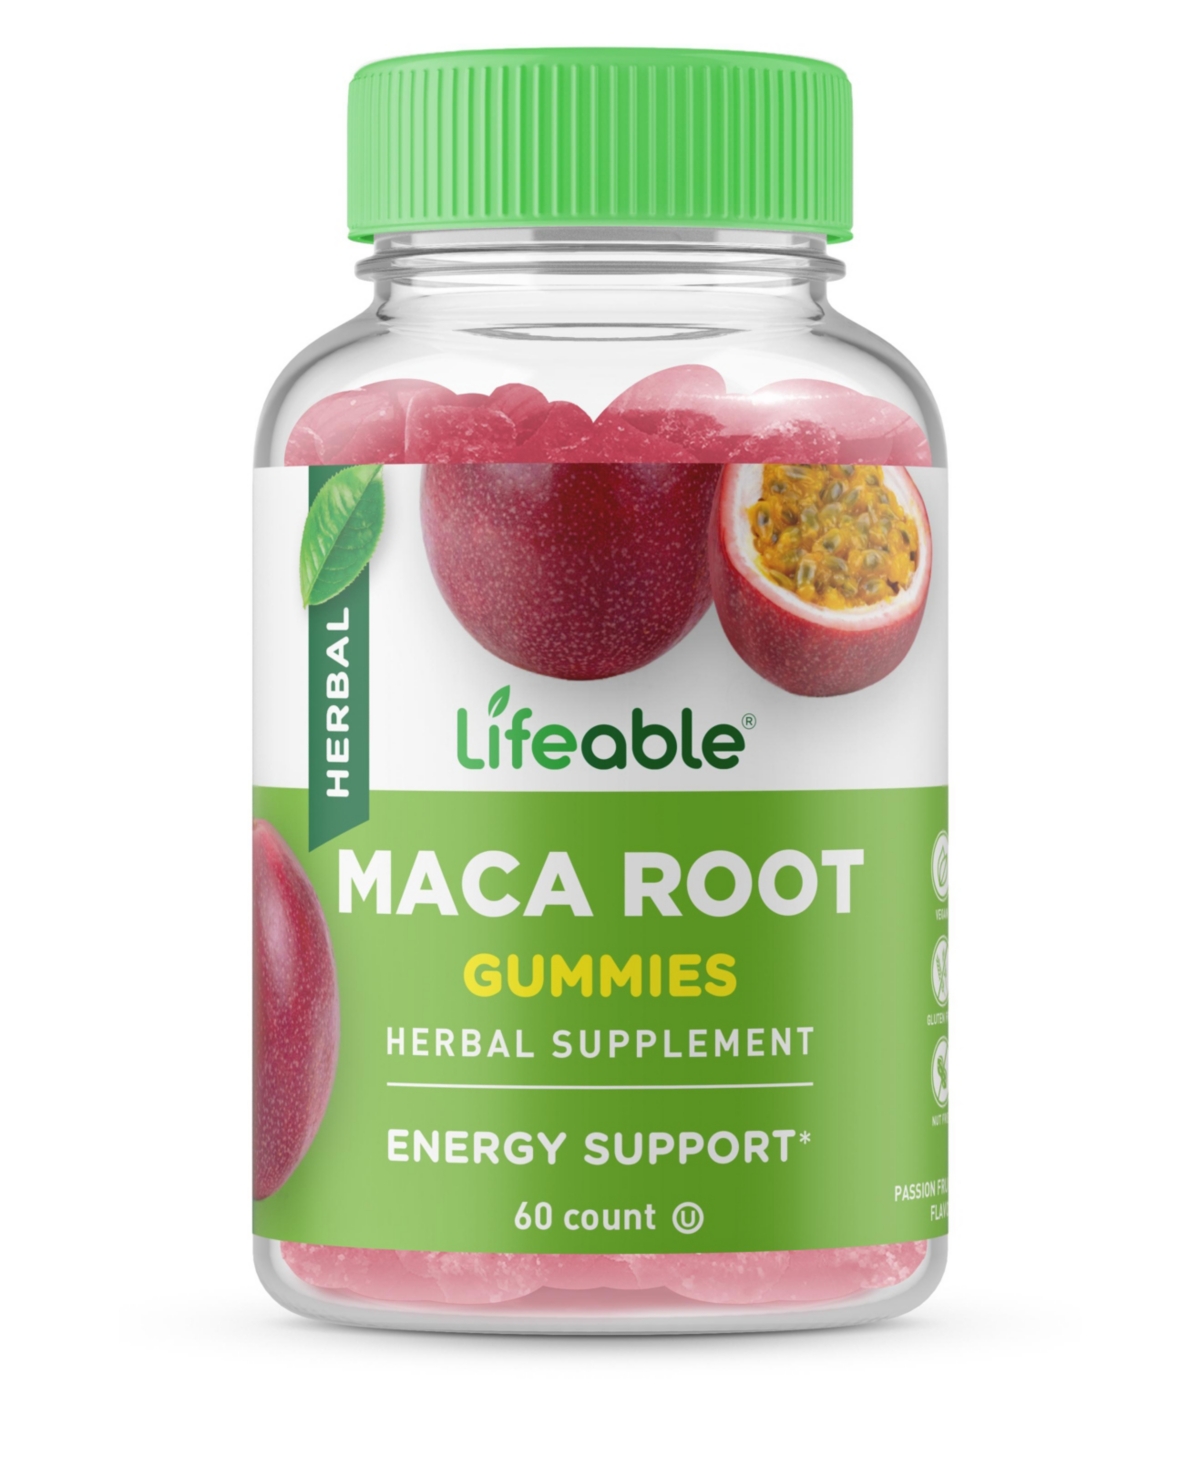 Maca Root Extract 50 mg Gummies - Energy Support - Great Tasting Natural Flavor, Herbal Supplement Vitamins - 60 Gummies - Open Miscellaneous